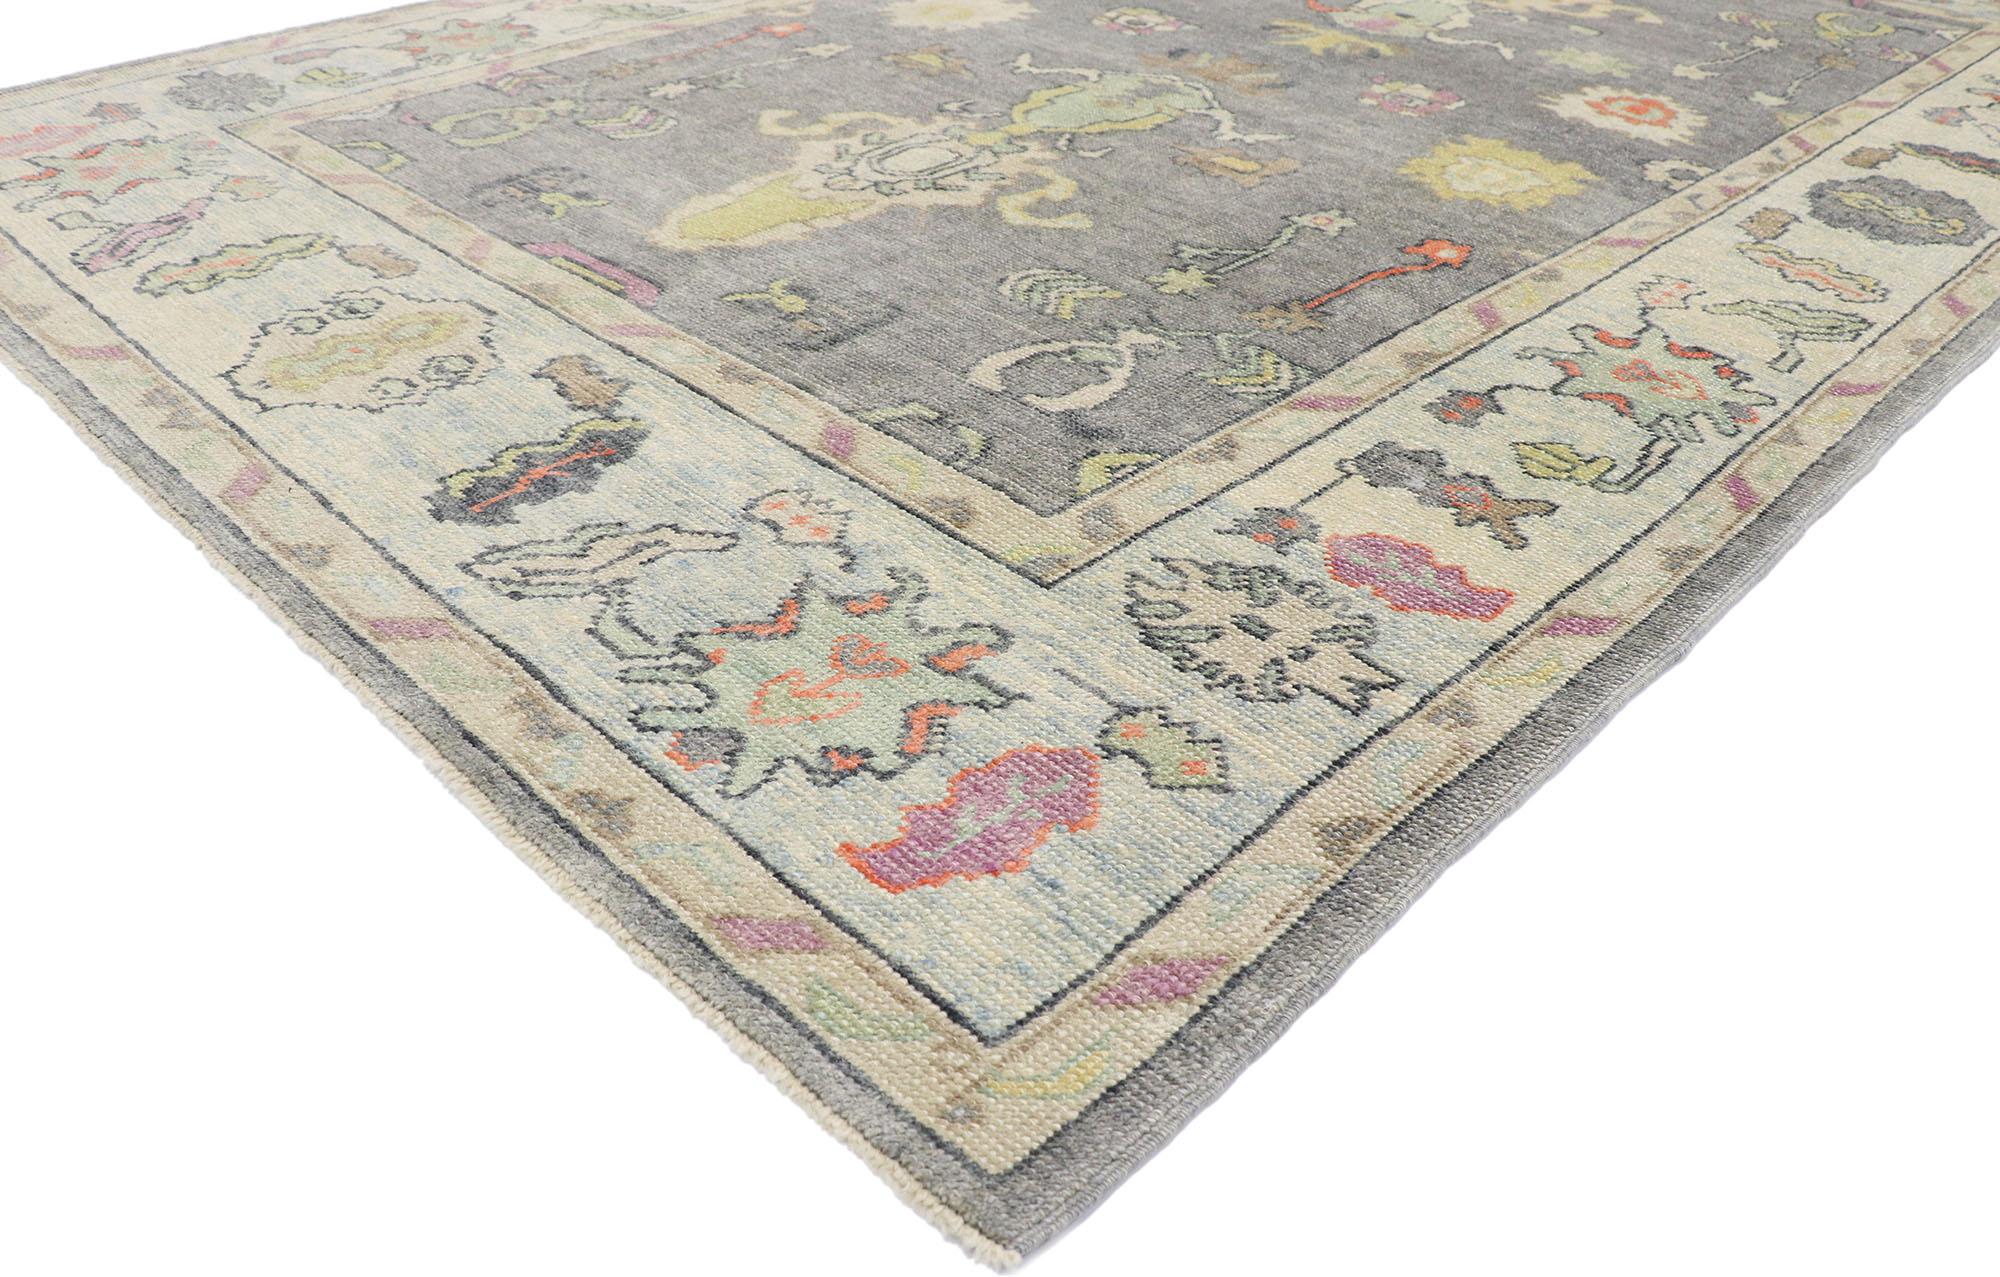 53555 new contemporary Turkish Oushak rug with Modern Parisian style 06'11 x 10'08. Polished and playful, this hand-knotted wool Turkish Oushak rug beautifully embodies a modern Parisian style. The dominant gray field features a colorful array of